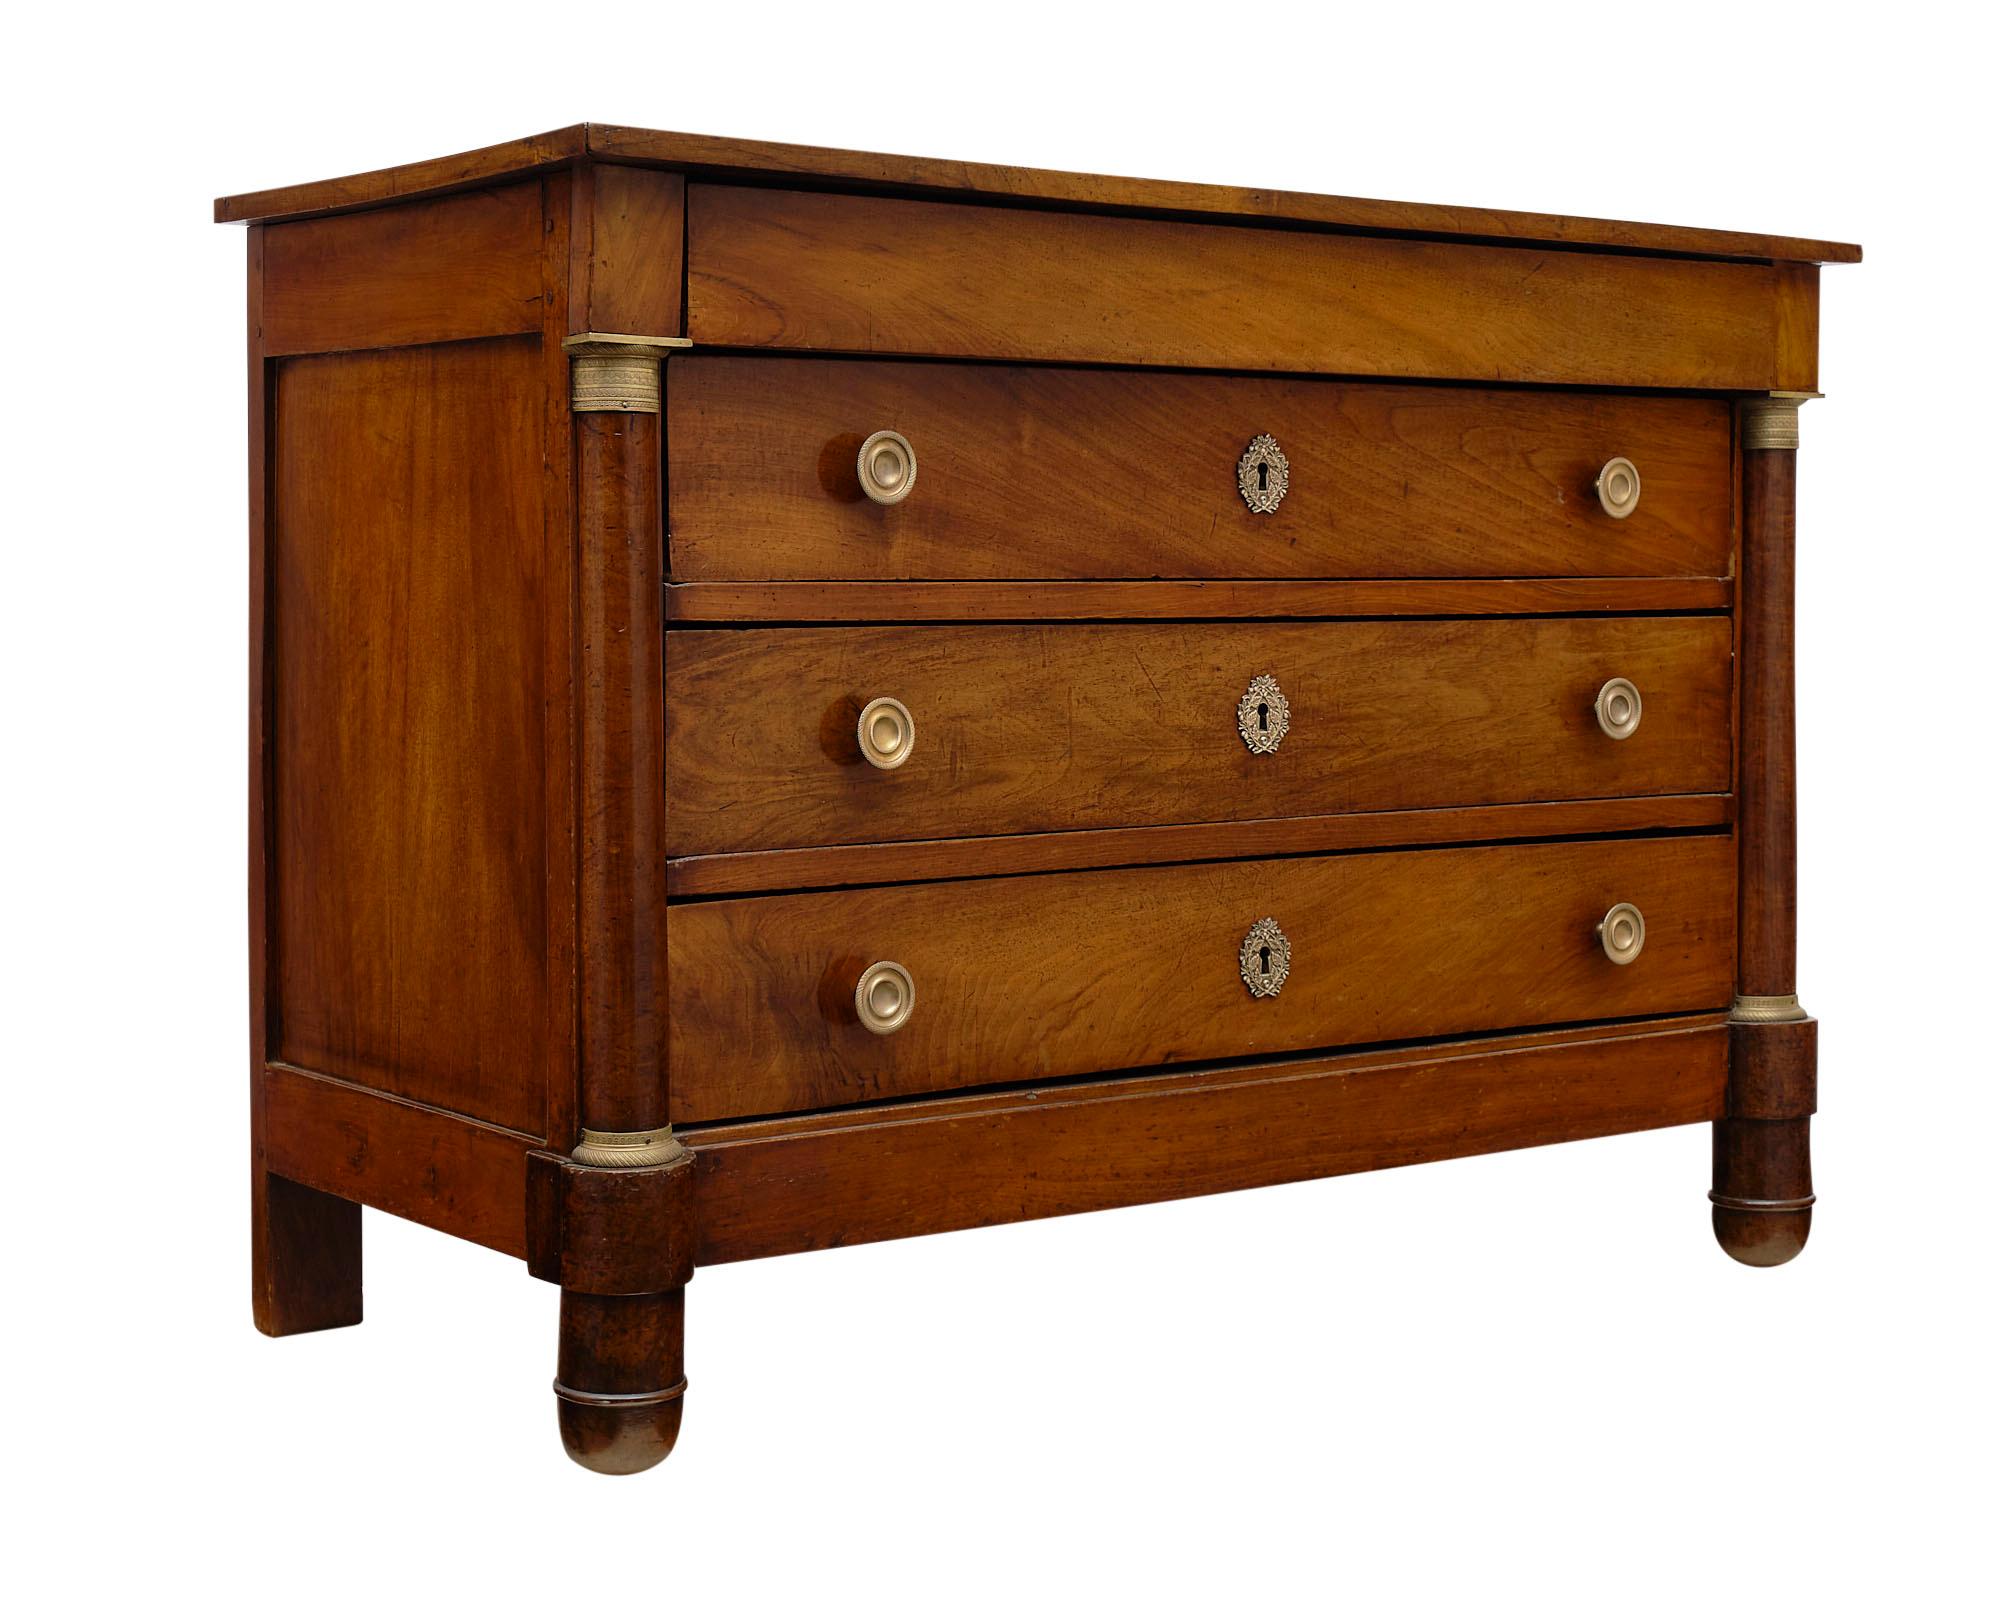 Empire Period antique chest of drawers made of solid walnut and finished with a lustrous French polish. The half detached columns give it a striking appearance and we love the functional four dovetailed drawers. The hardware is all finely cast